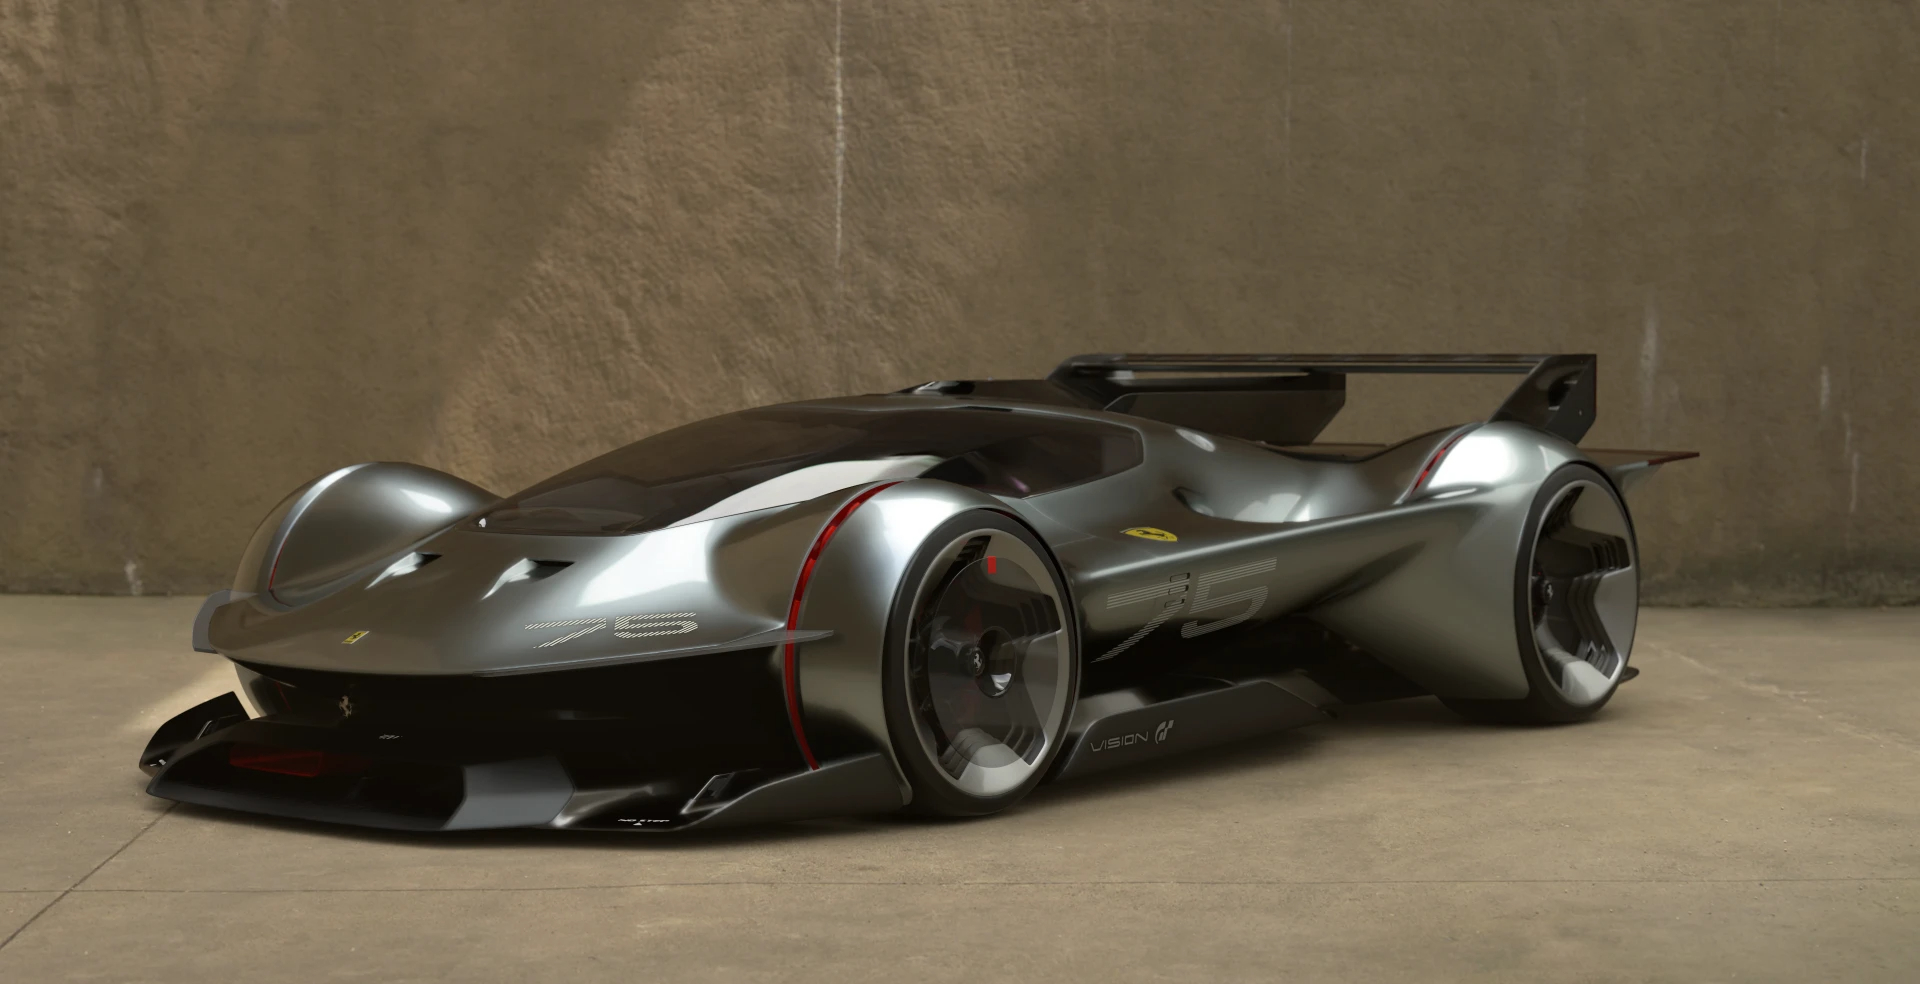 Gran Turismo 7 Update 1.27 Brings Several New Cars, Here Are The Patch Notes